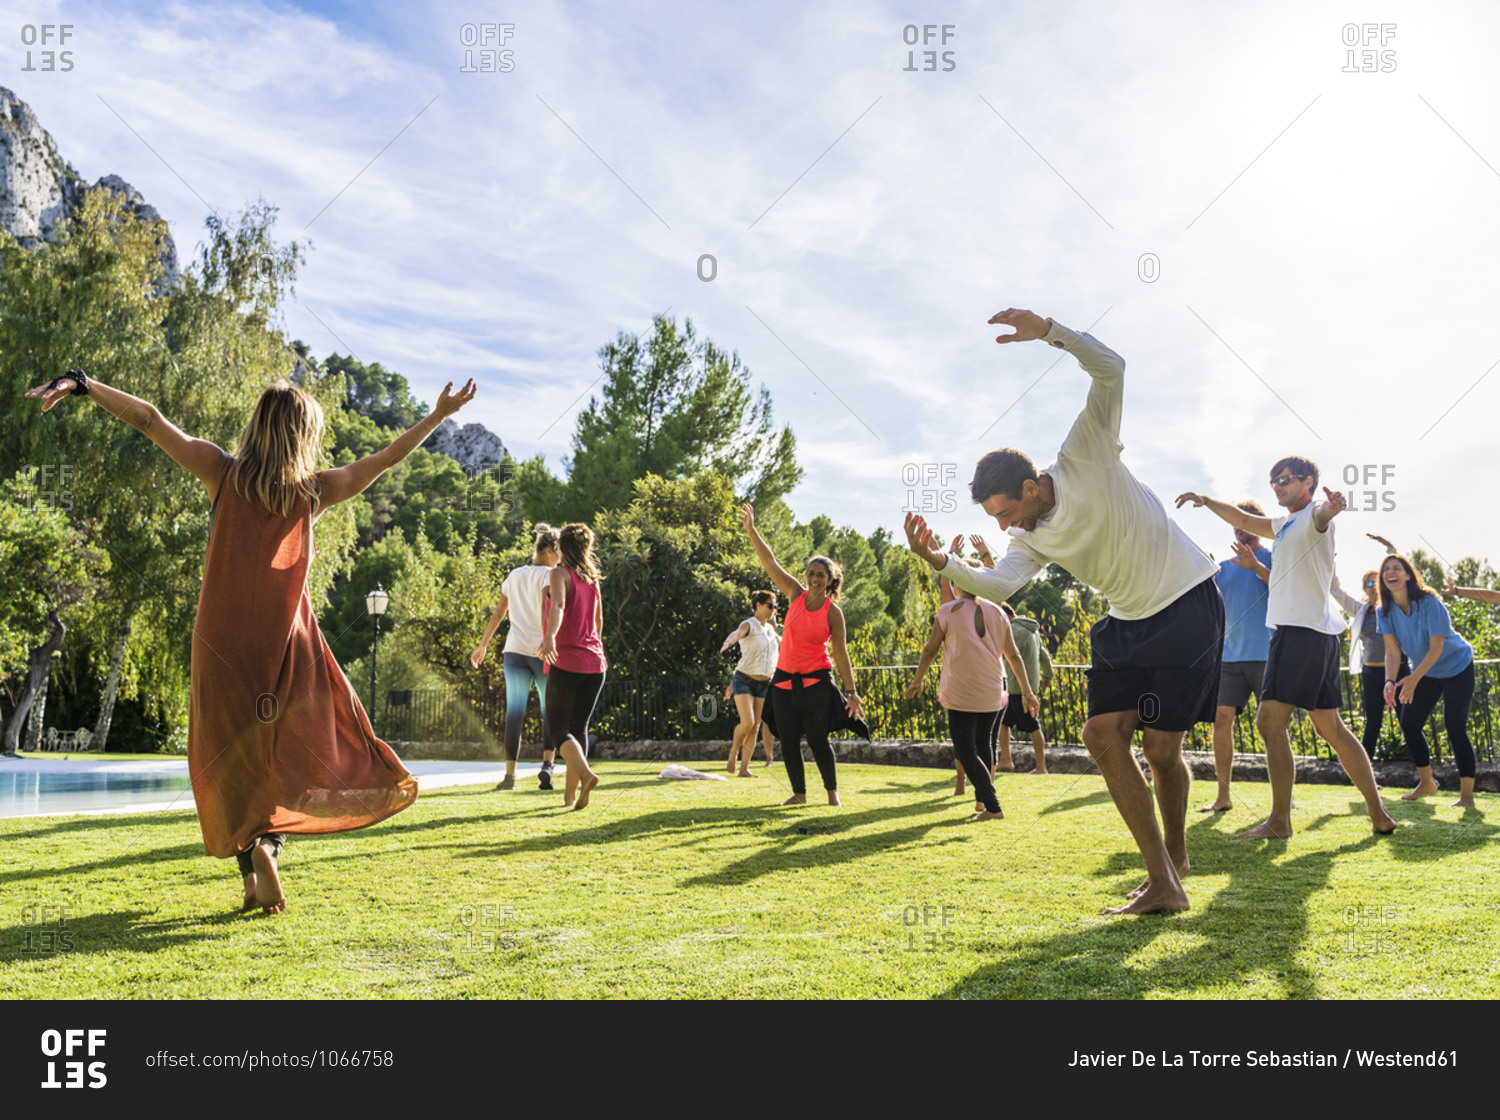 Mature female fitness instructor dancing with tourists at health retreat on grass against sky during sunny day